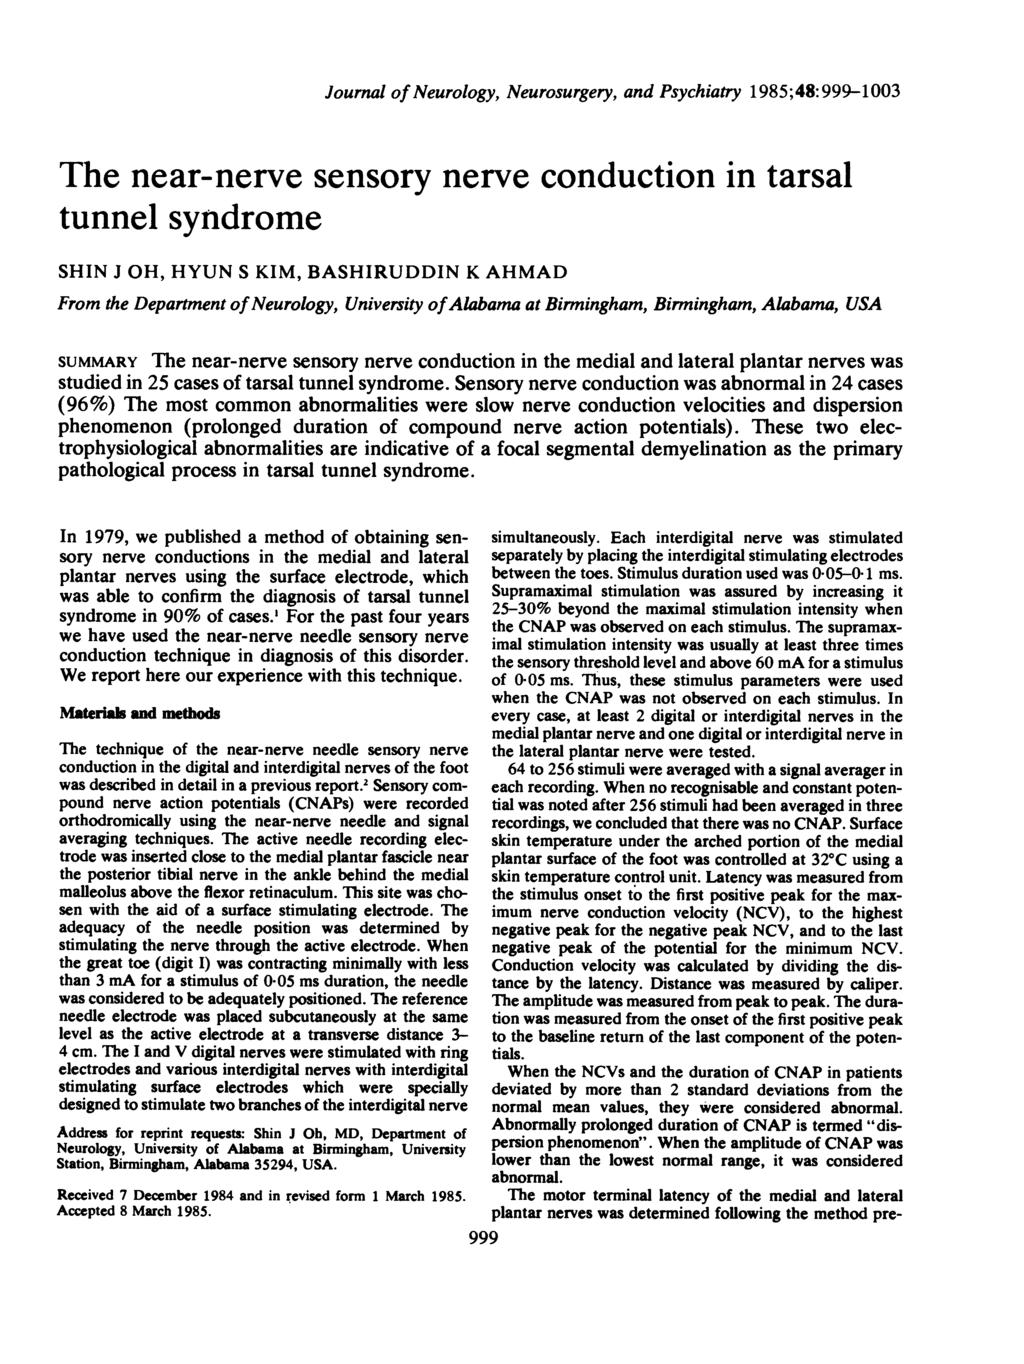 Journal of Neurology, Neurosurgery, and Psychiatry 1985;48: 999-1003 The near-nerve sensory nerve conduction in tarsal tunnel syndrome SHN J OH, HYUN S KM, BASHRUDDN K AHMAD From the Department